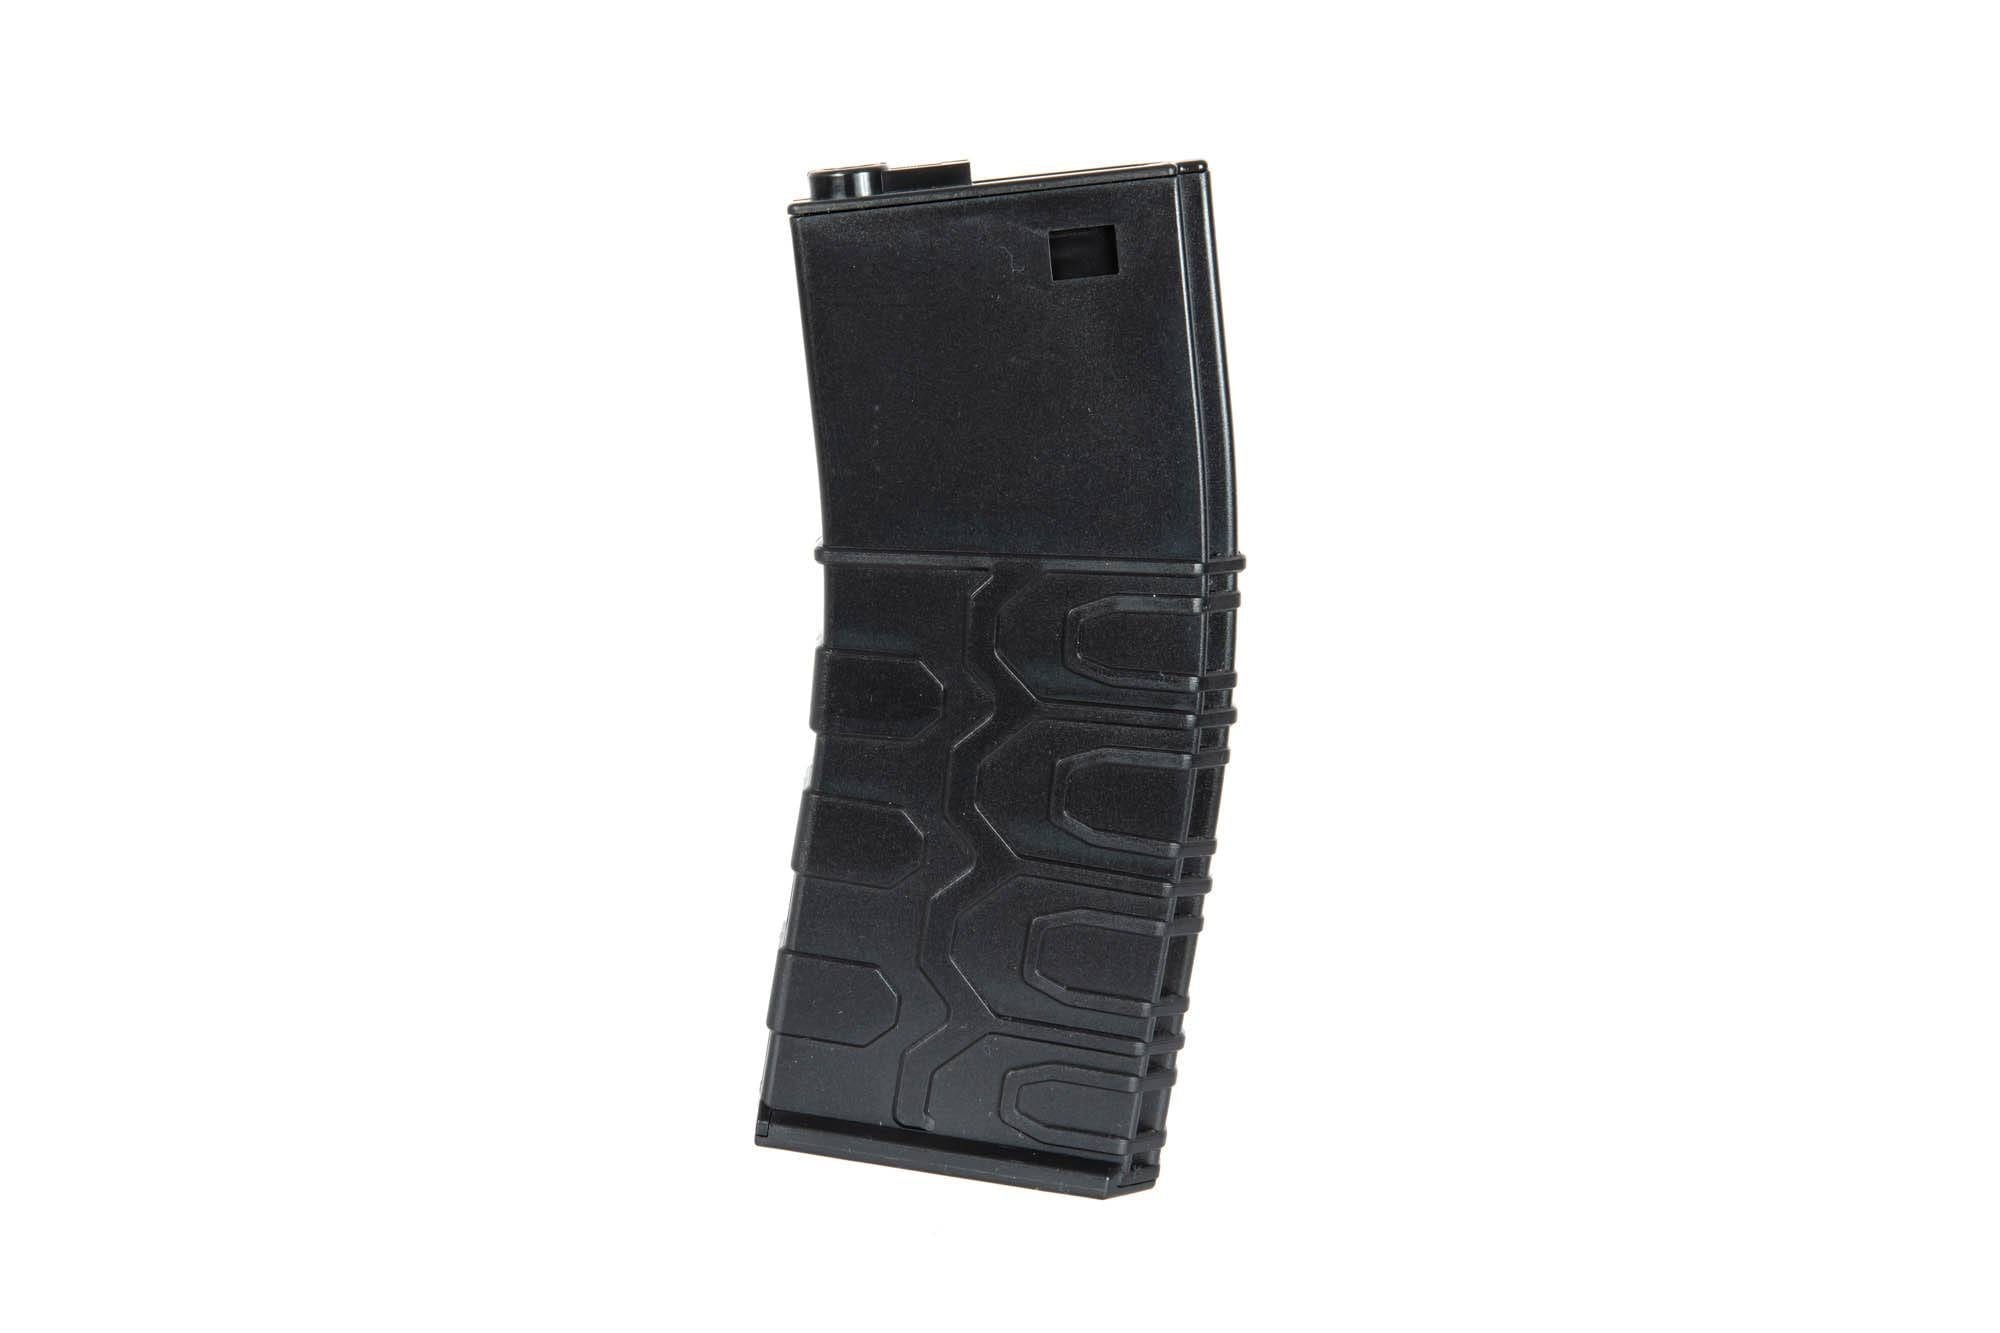 T4 hi-cap magazine for M4/M16 300rd by ICS on Airsoft Mania Europe